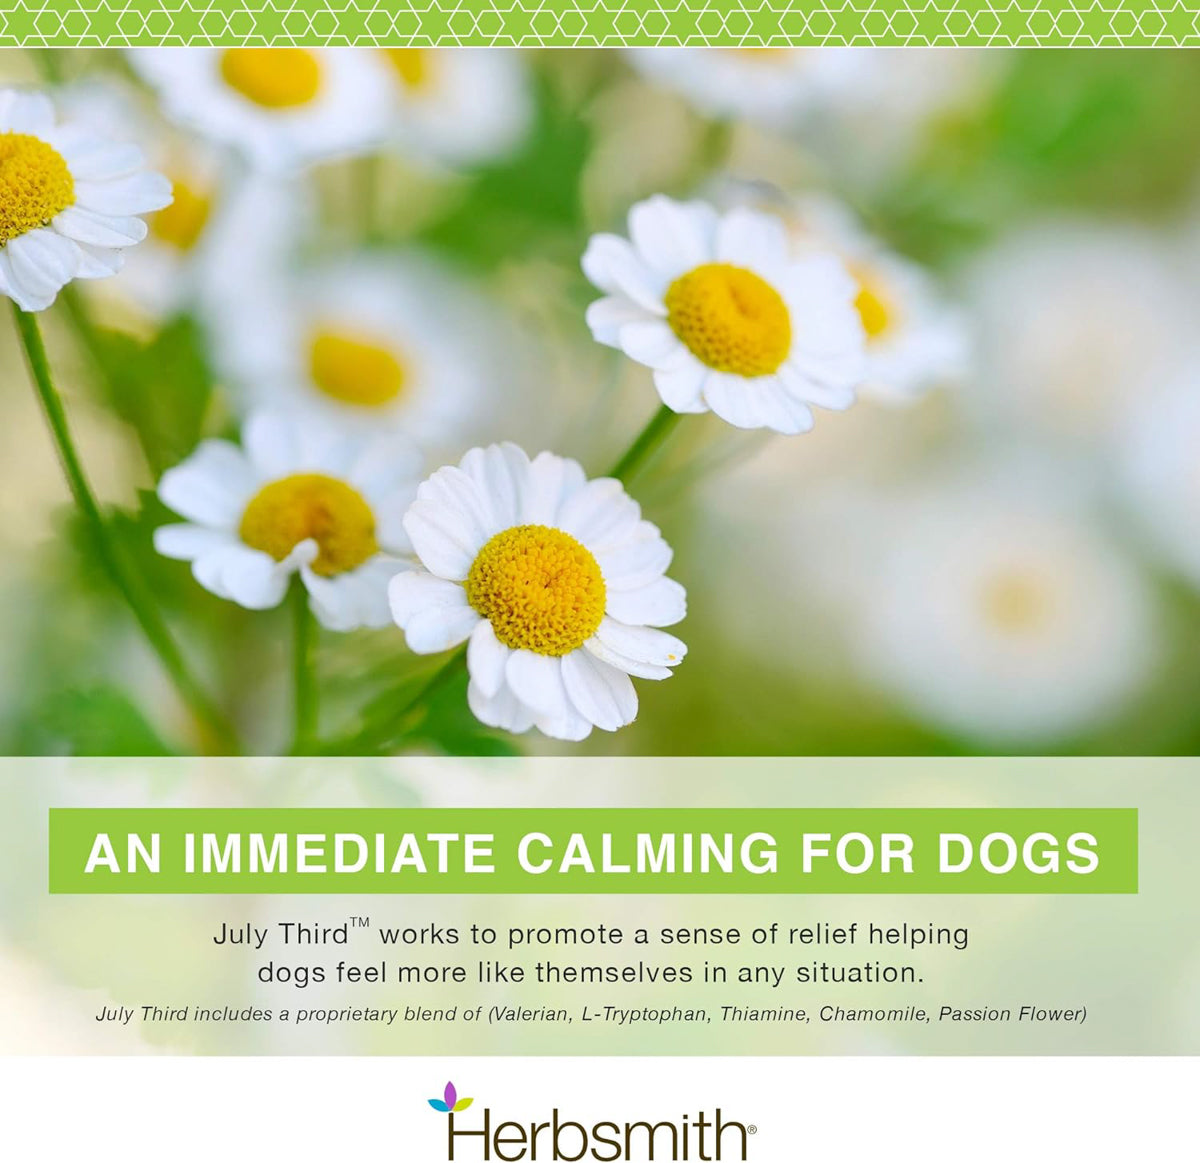 infographic showing benefits of July Third Supplement for Dogs, with white flowers 